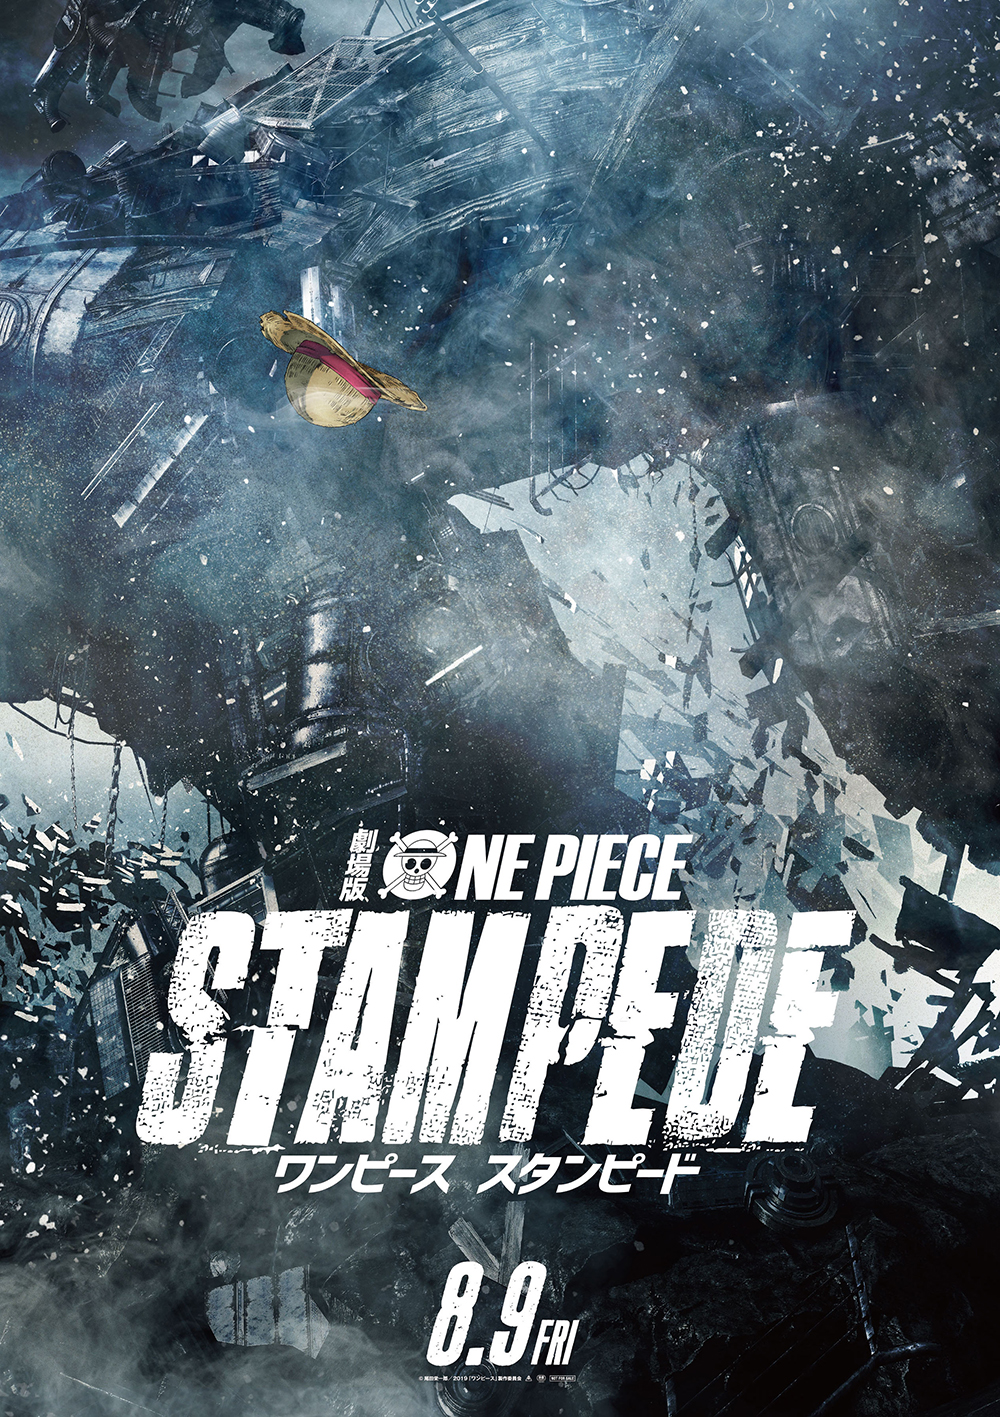 “ONE PIECE STAMPEDE”, the latest theatrical film in the One Piece